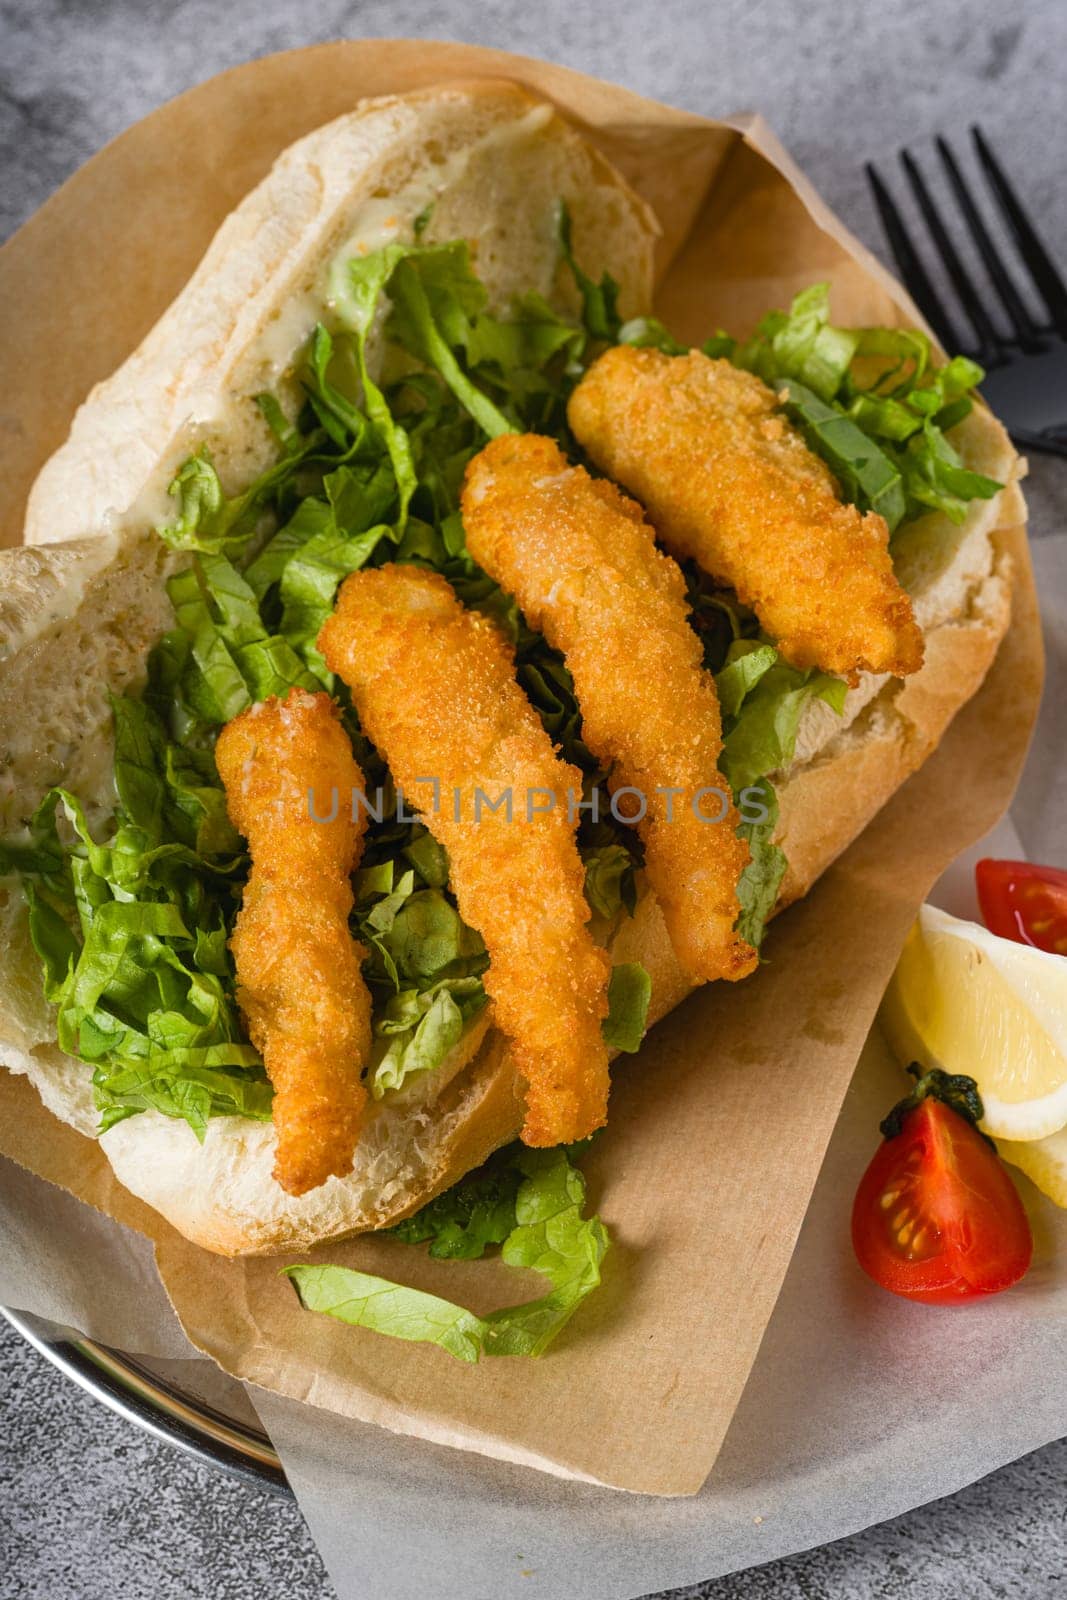 Deep fried shrimp in bread with greens on the side. Shrimp sandwich by Sonat